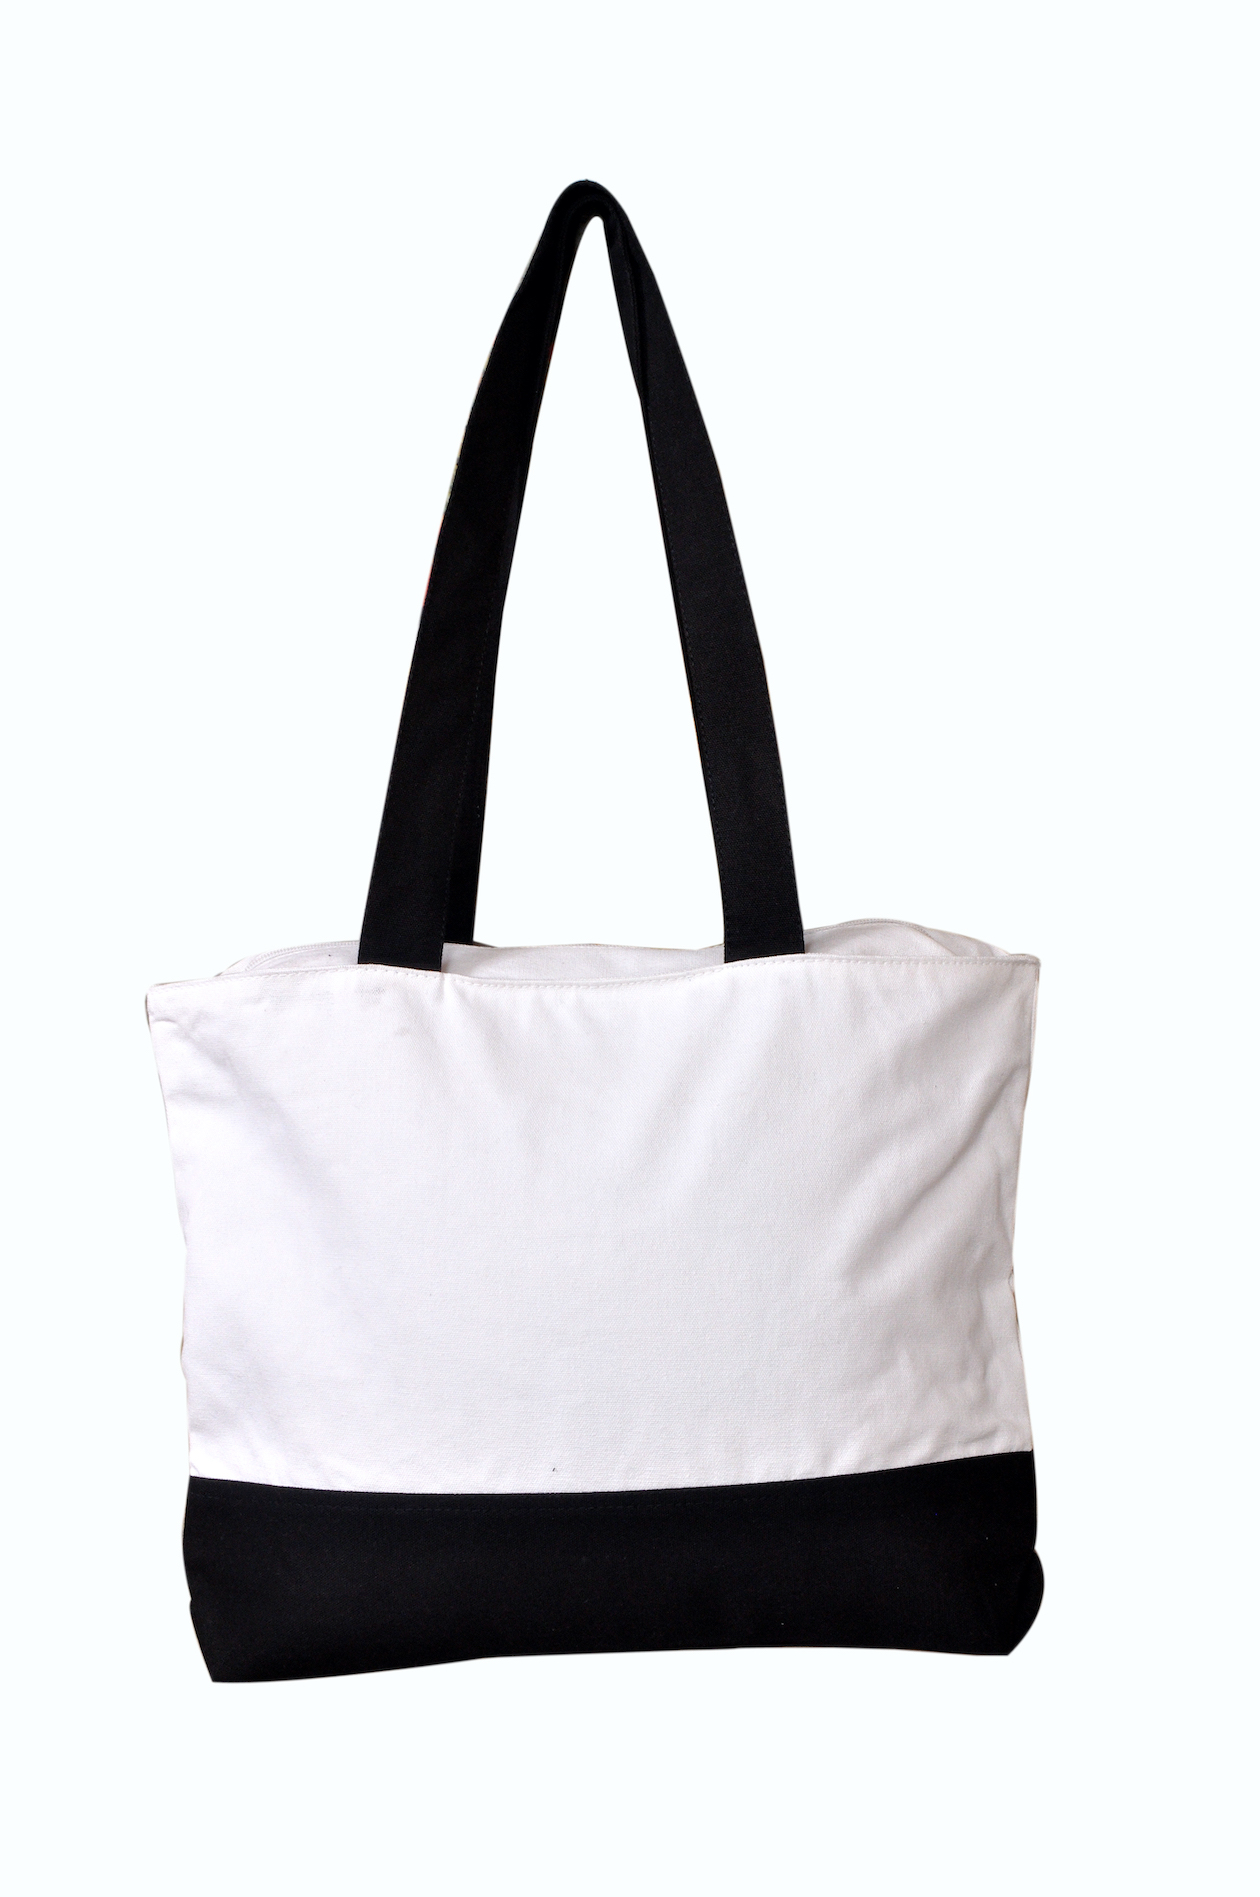 All About Tote Bag | Athleta